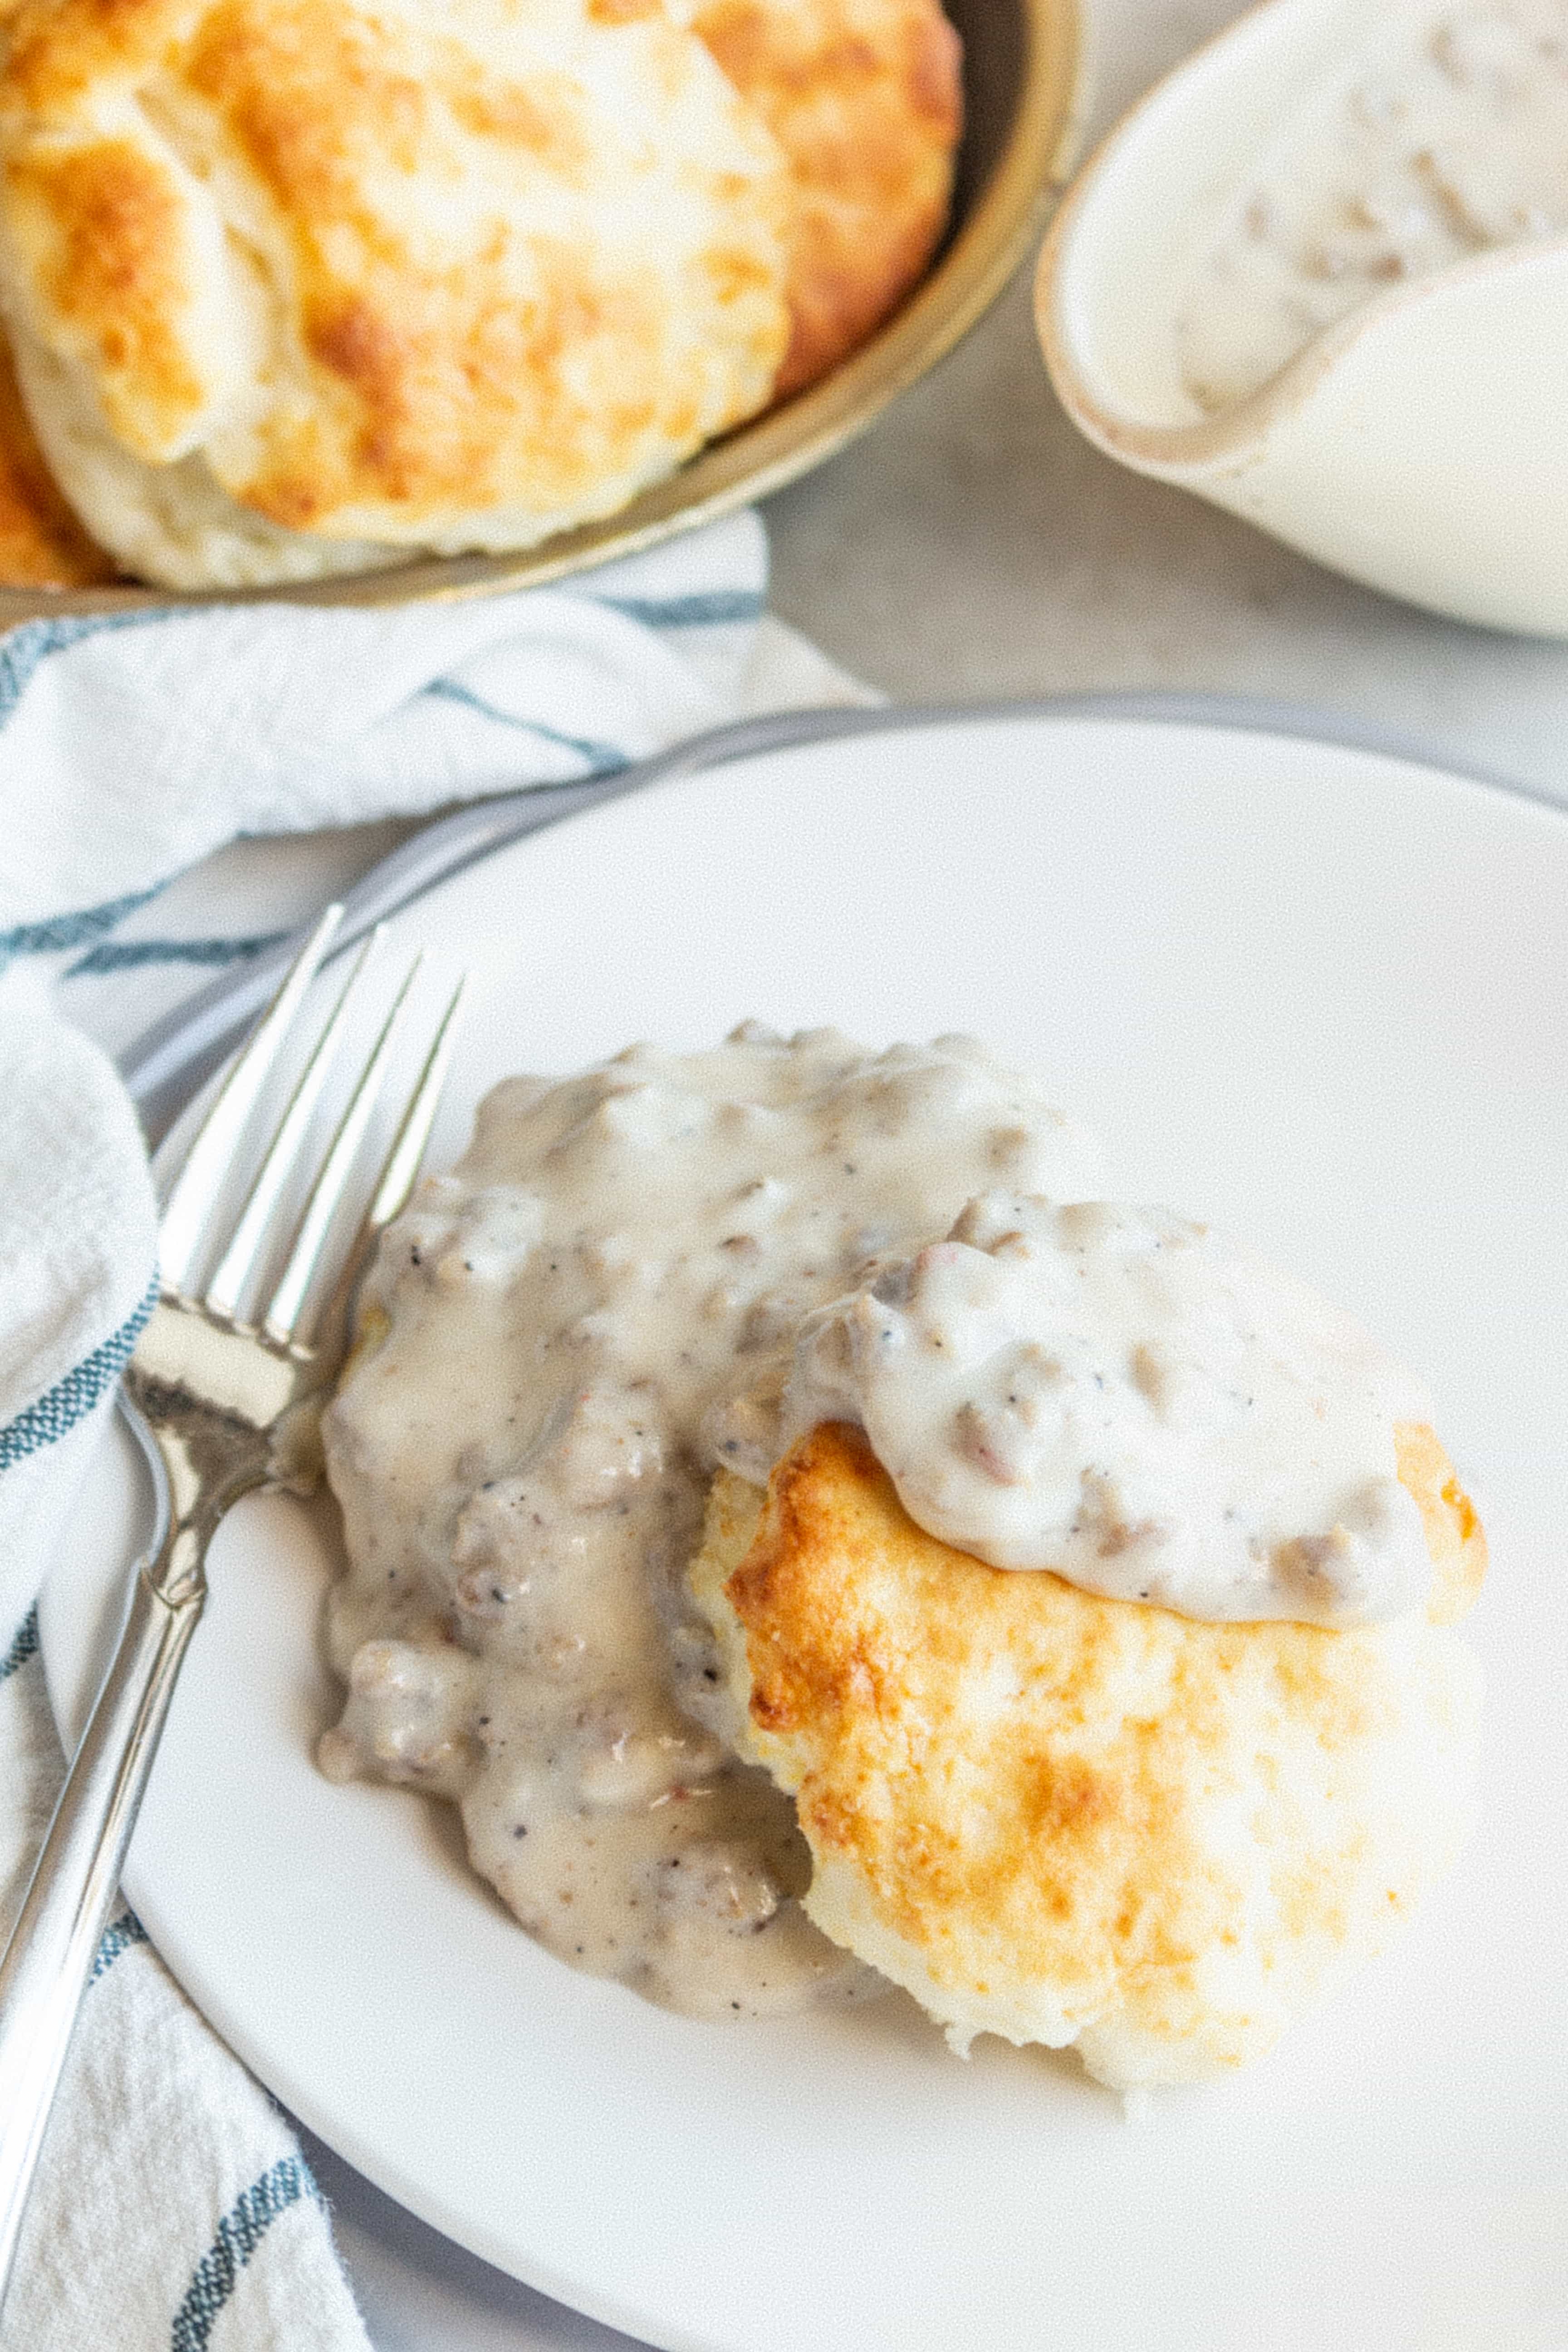 Gluten Free Biscuits And Gravy Life After Wheat,Best Dishwasher Rinse Aid